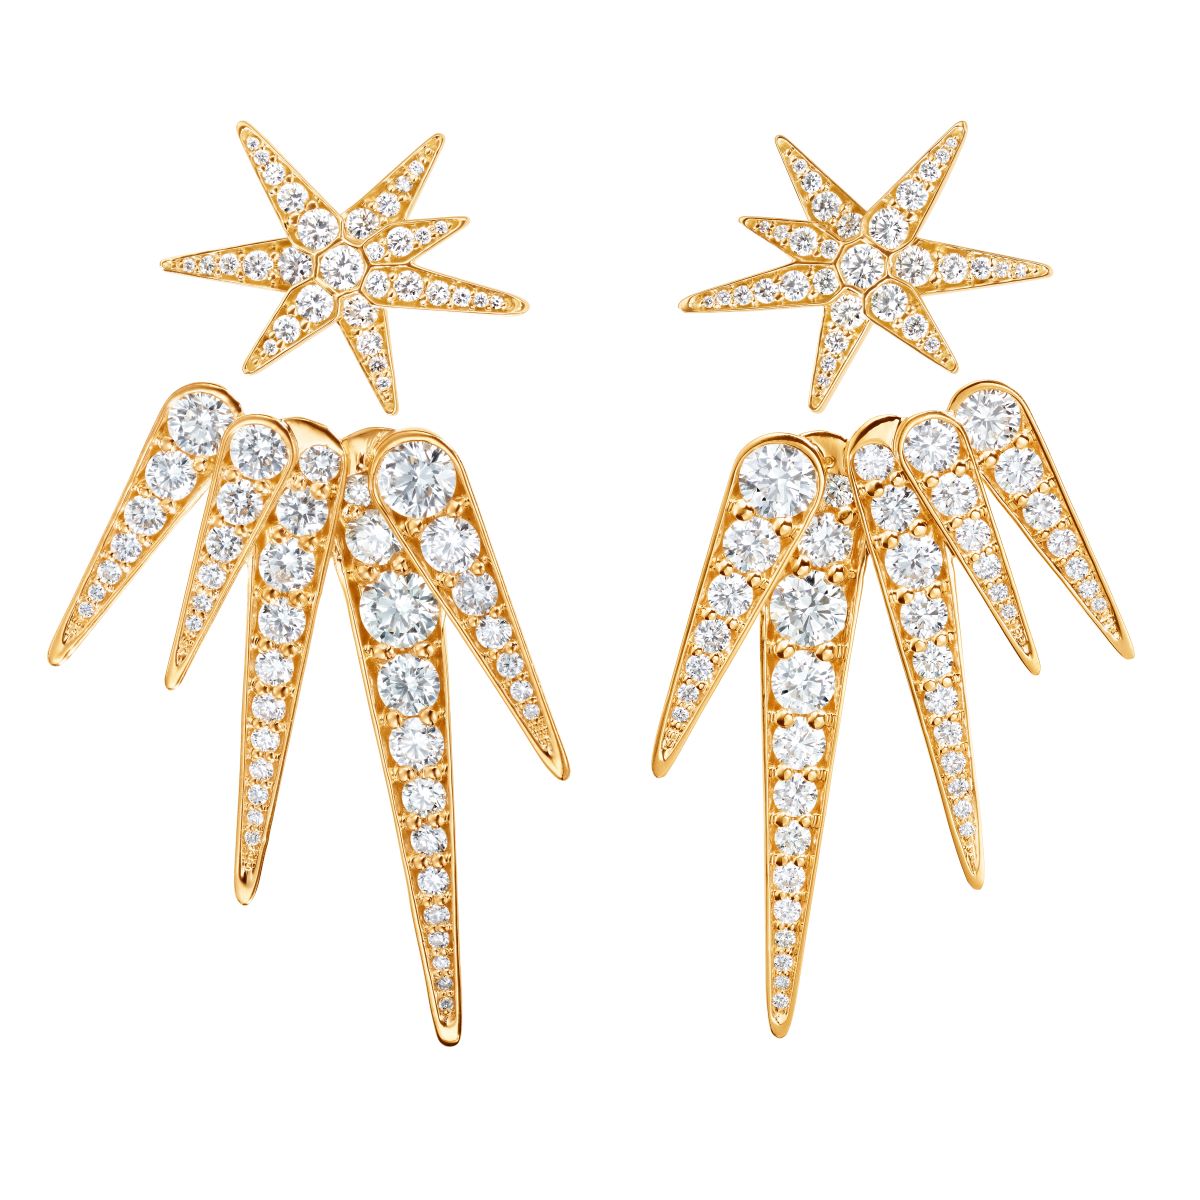 Funky Stars 5-Pointed Earring Pendant